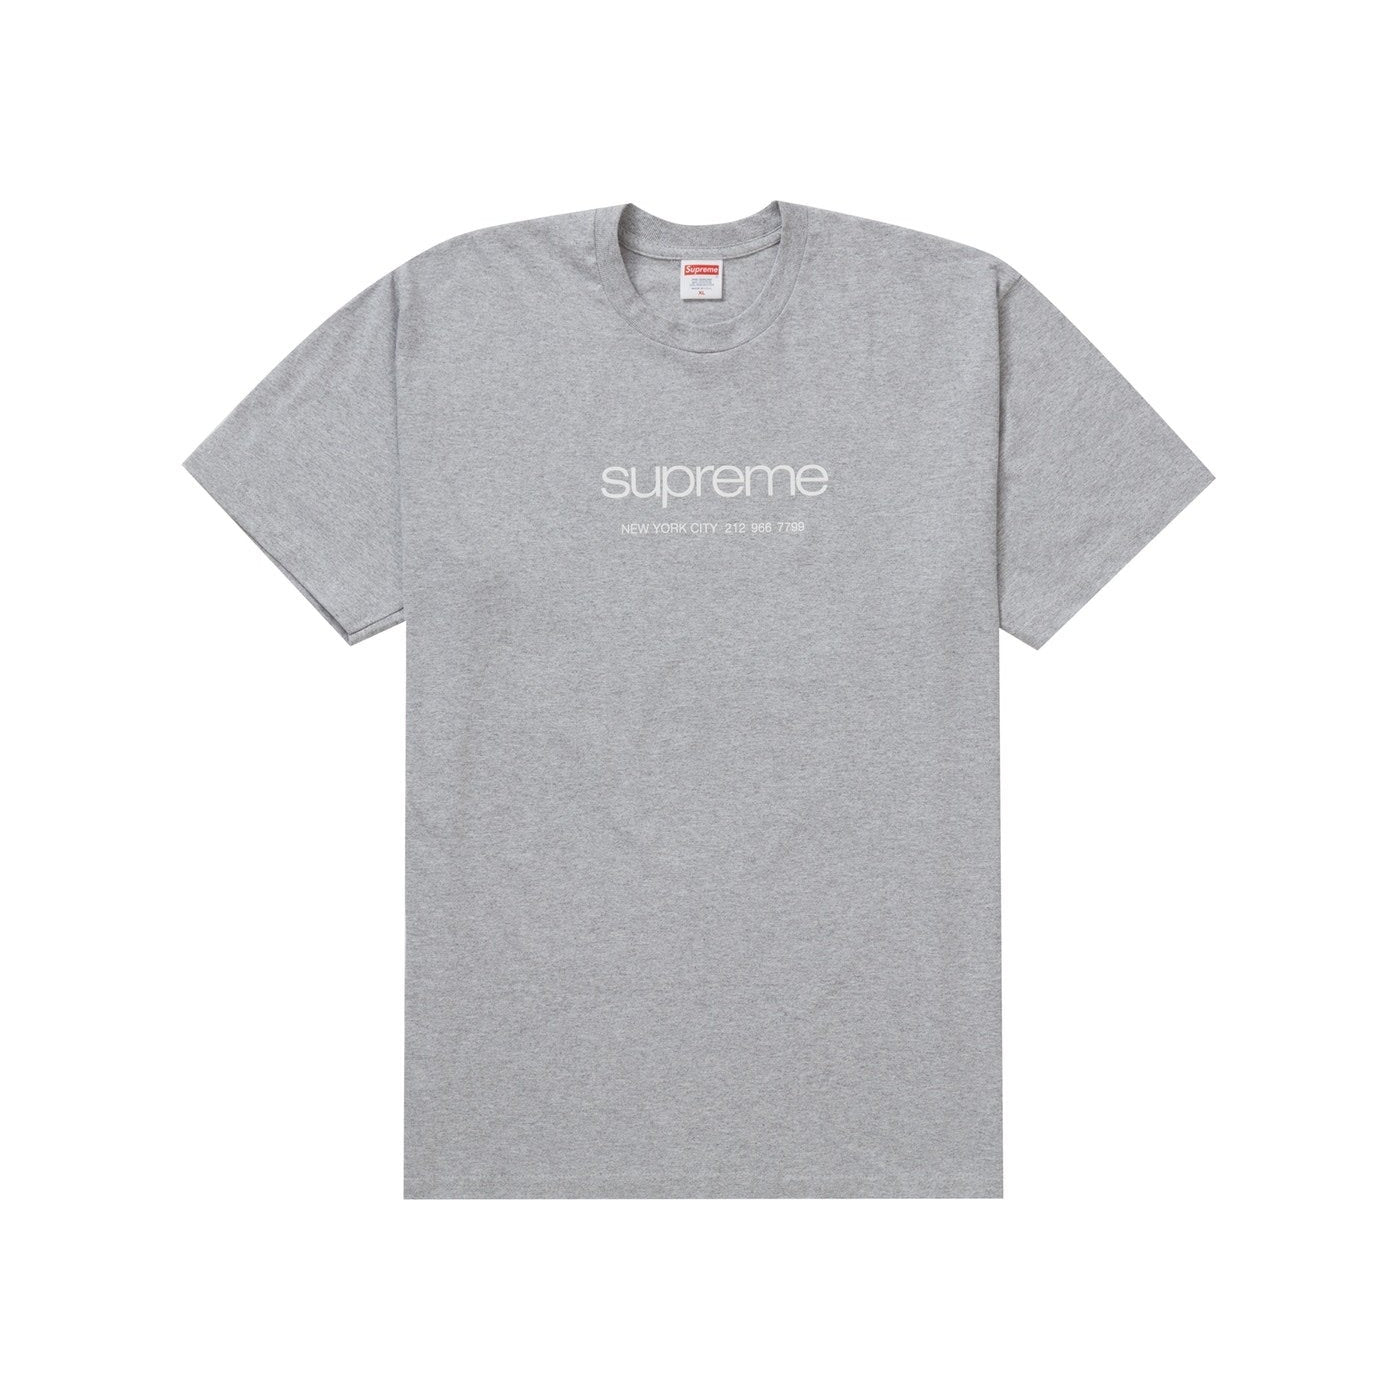 Supreme Shop Tee Heather Grey SS20 - Centrall Online